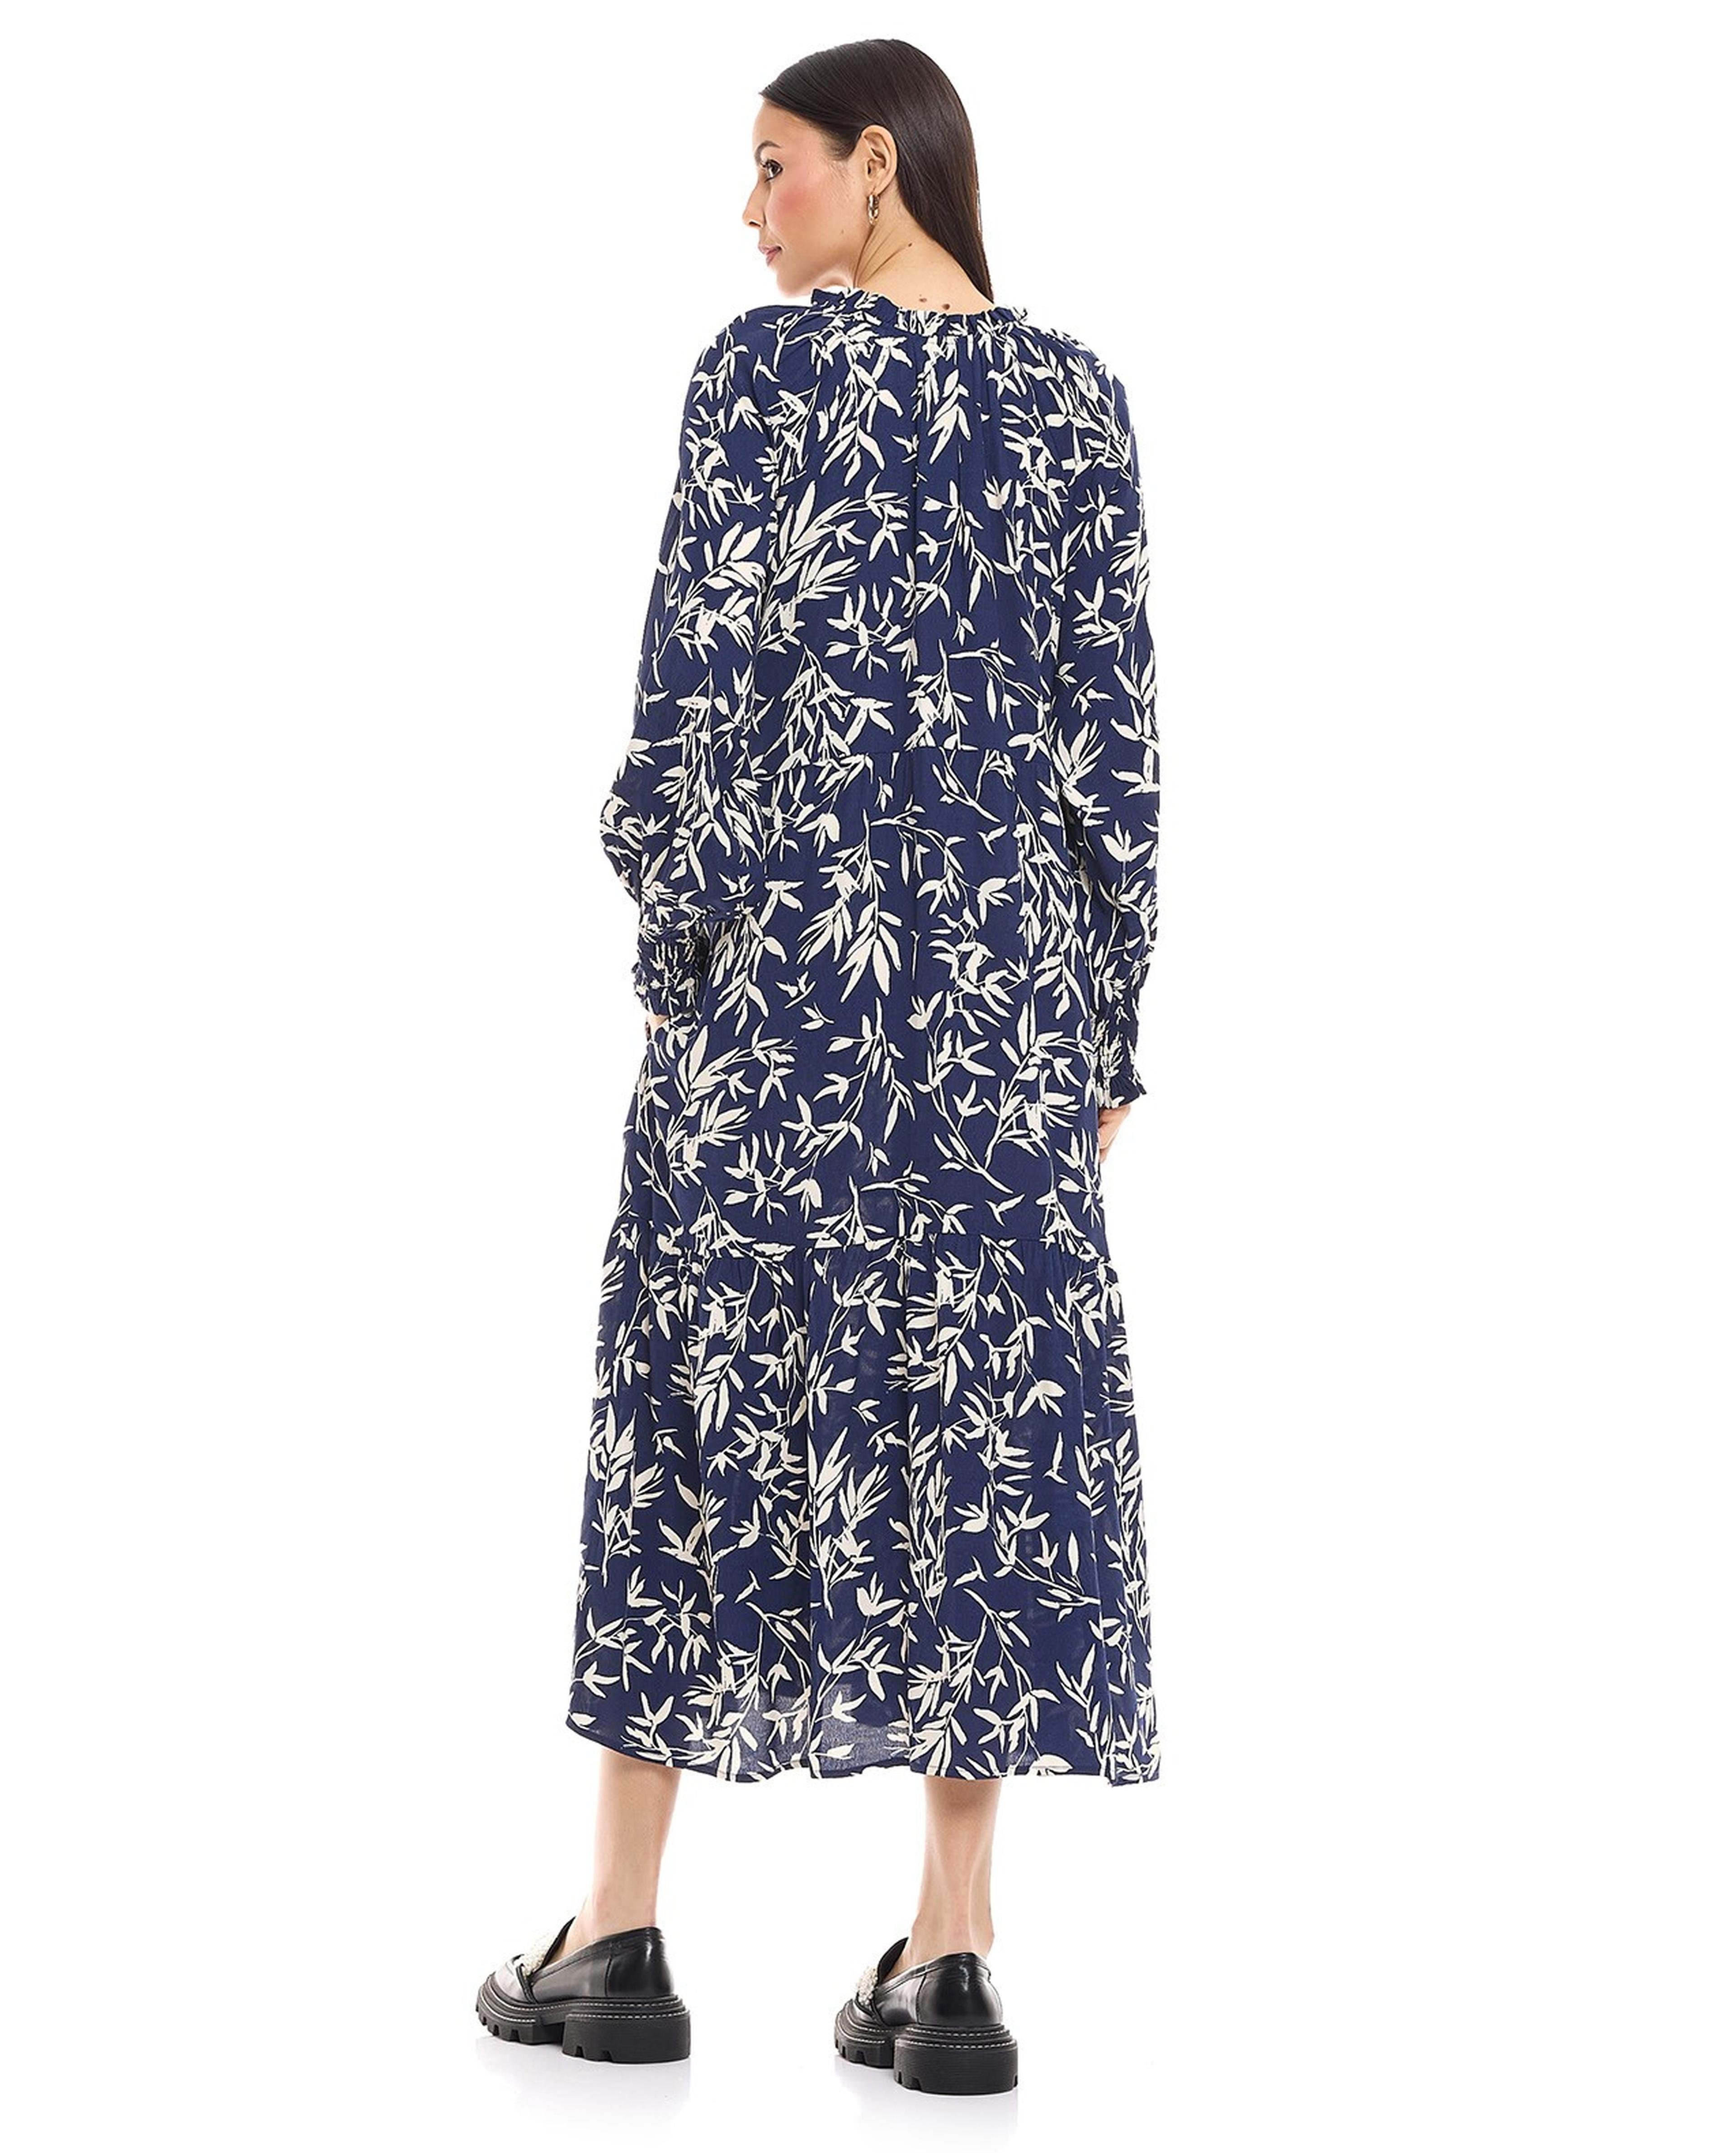 Floral Print A-Line Dress with V-Neck and Puff Sleeves